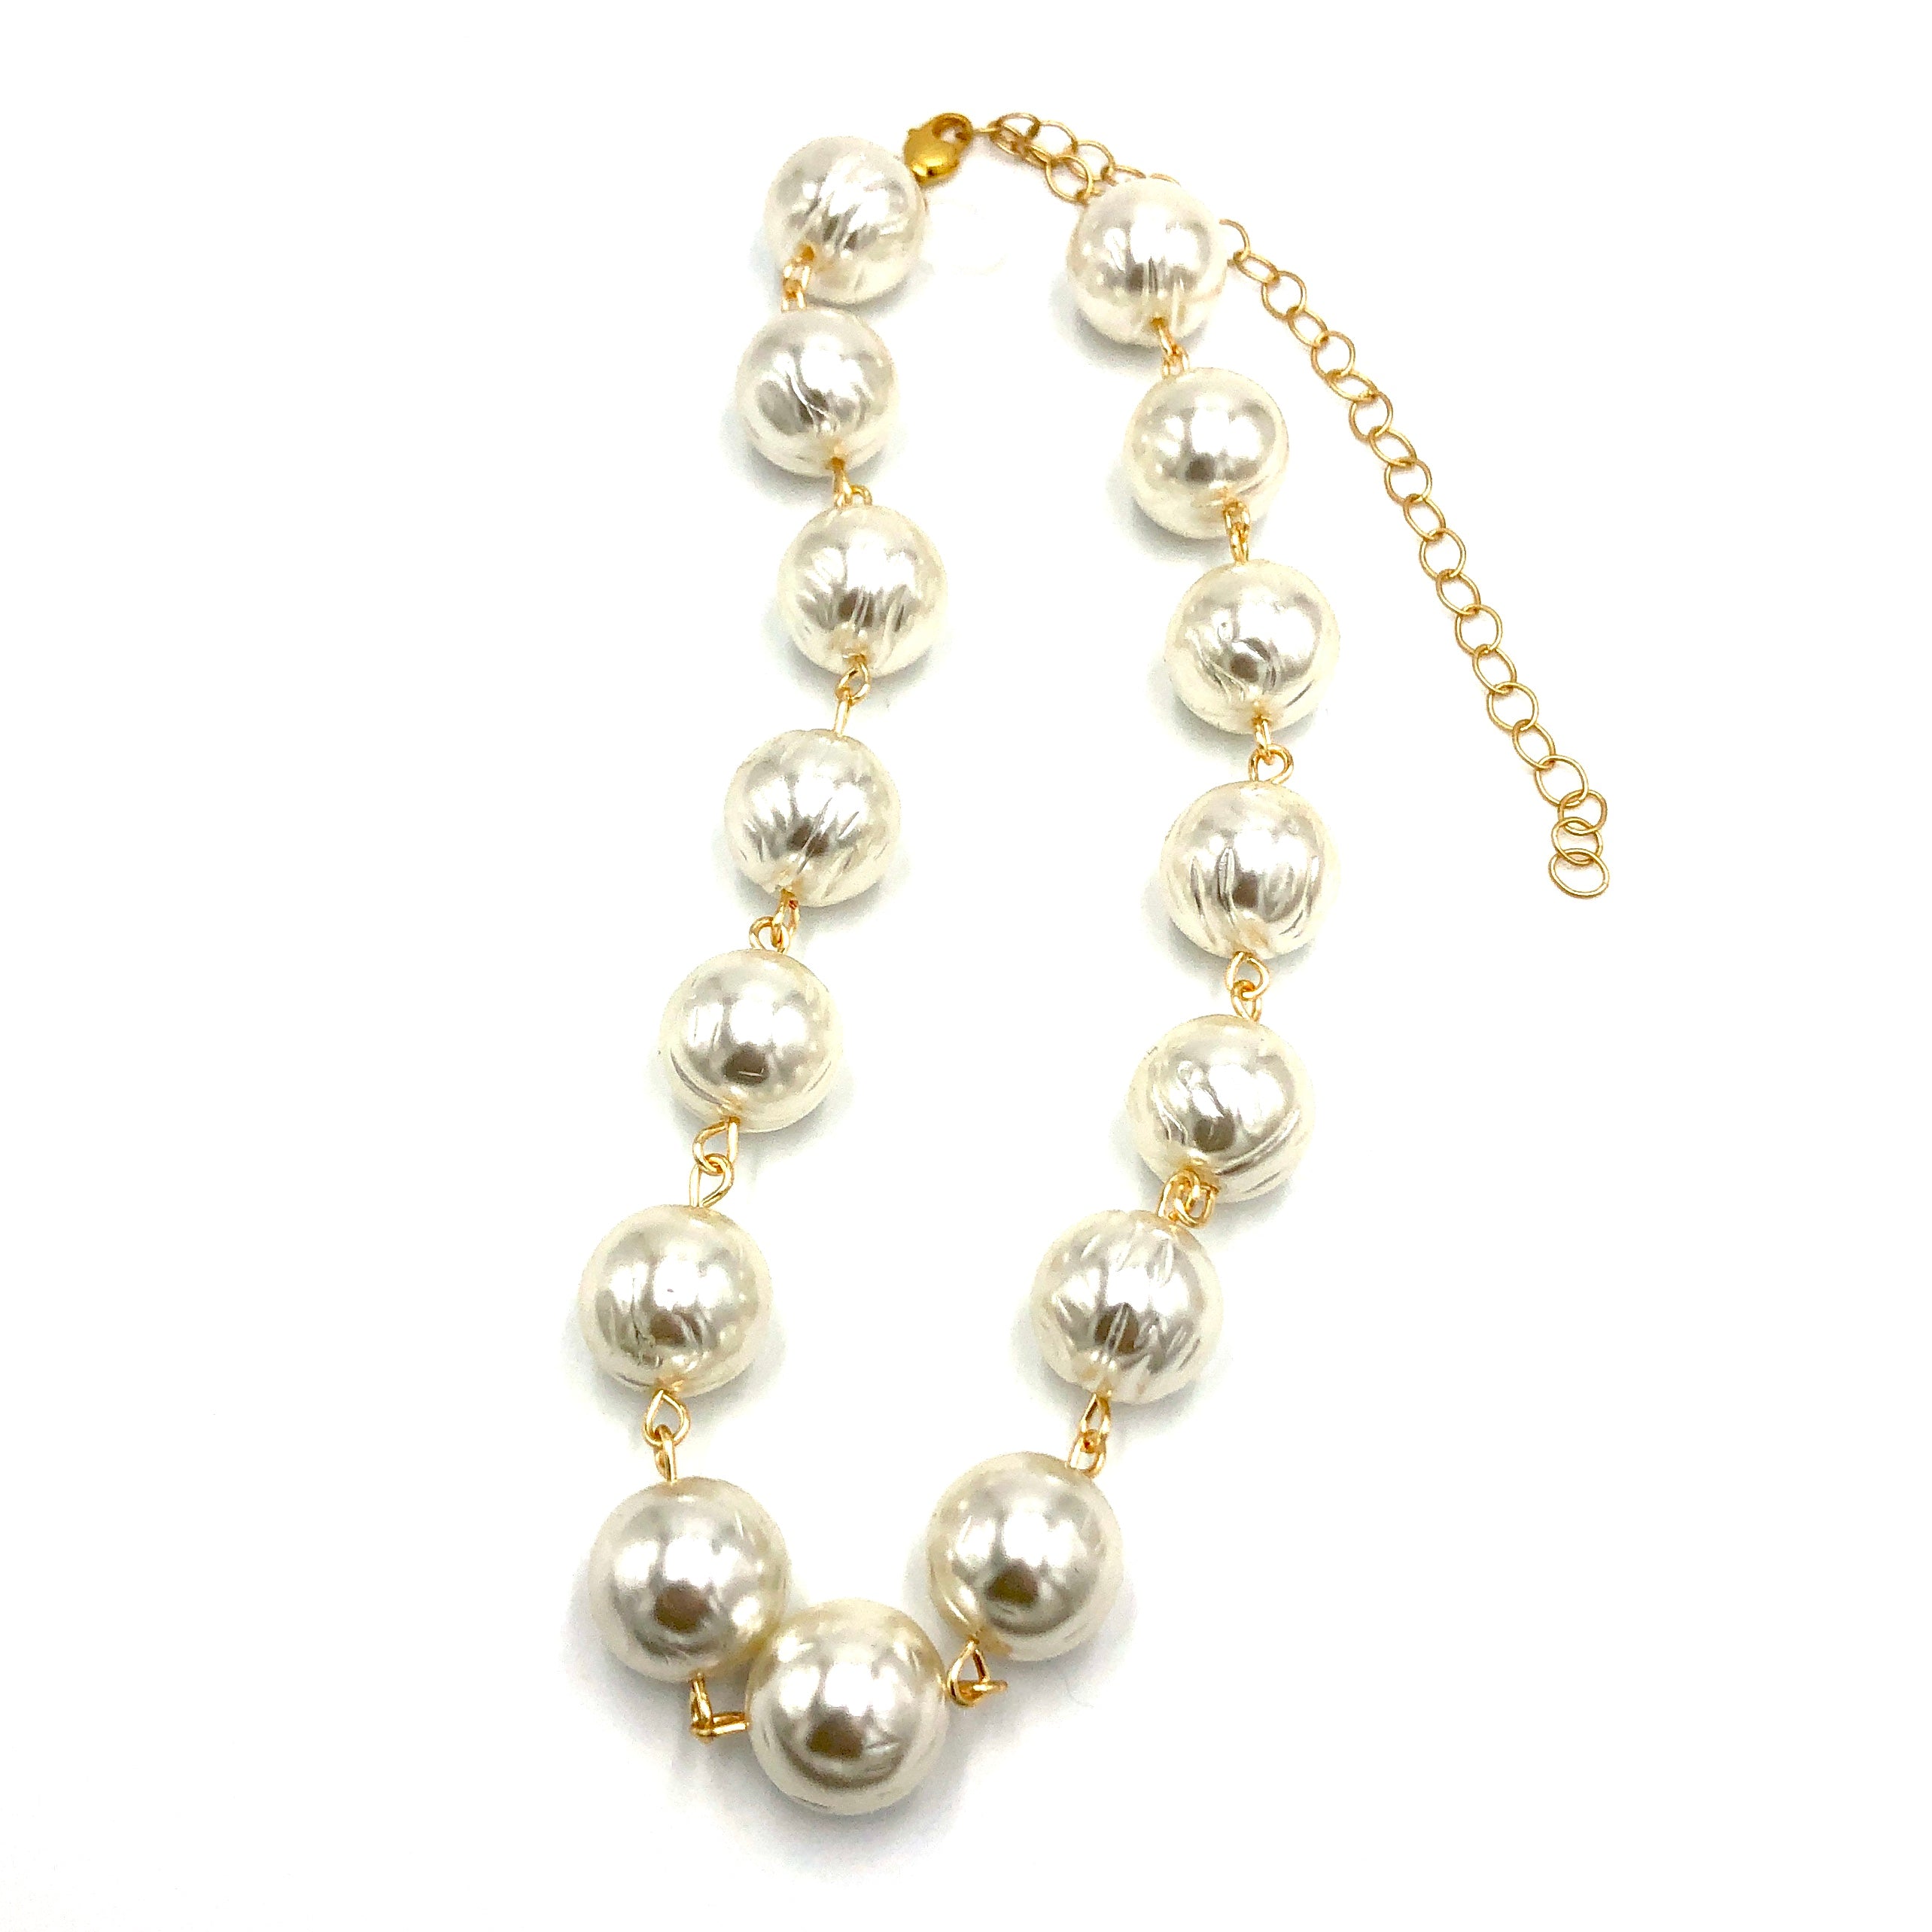 Wrinkled Pearls Amelia Necklace